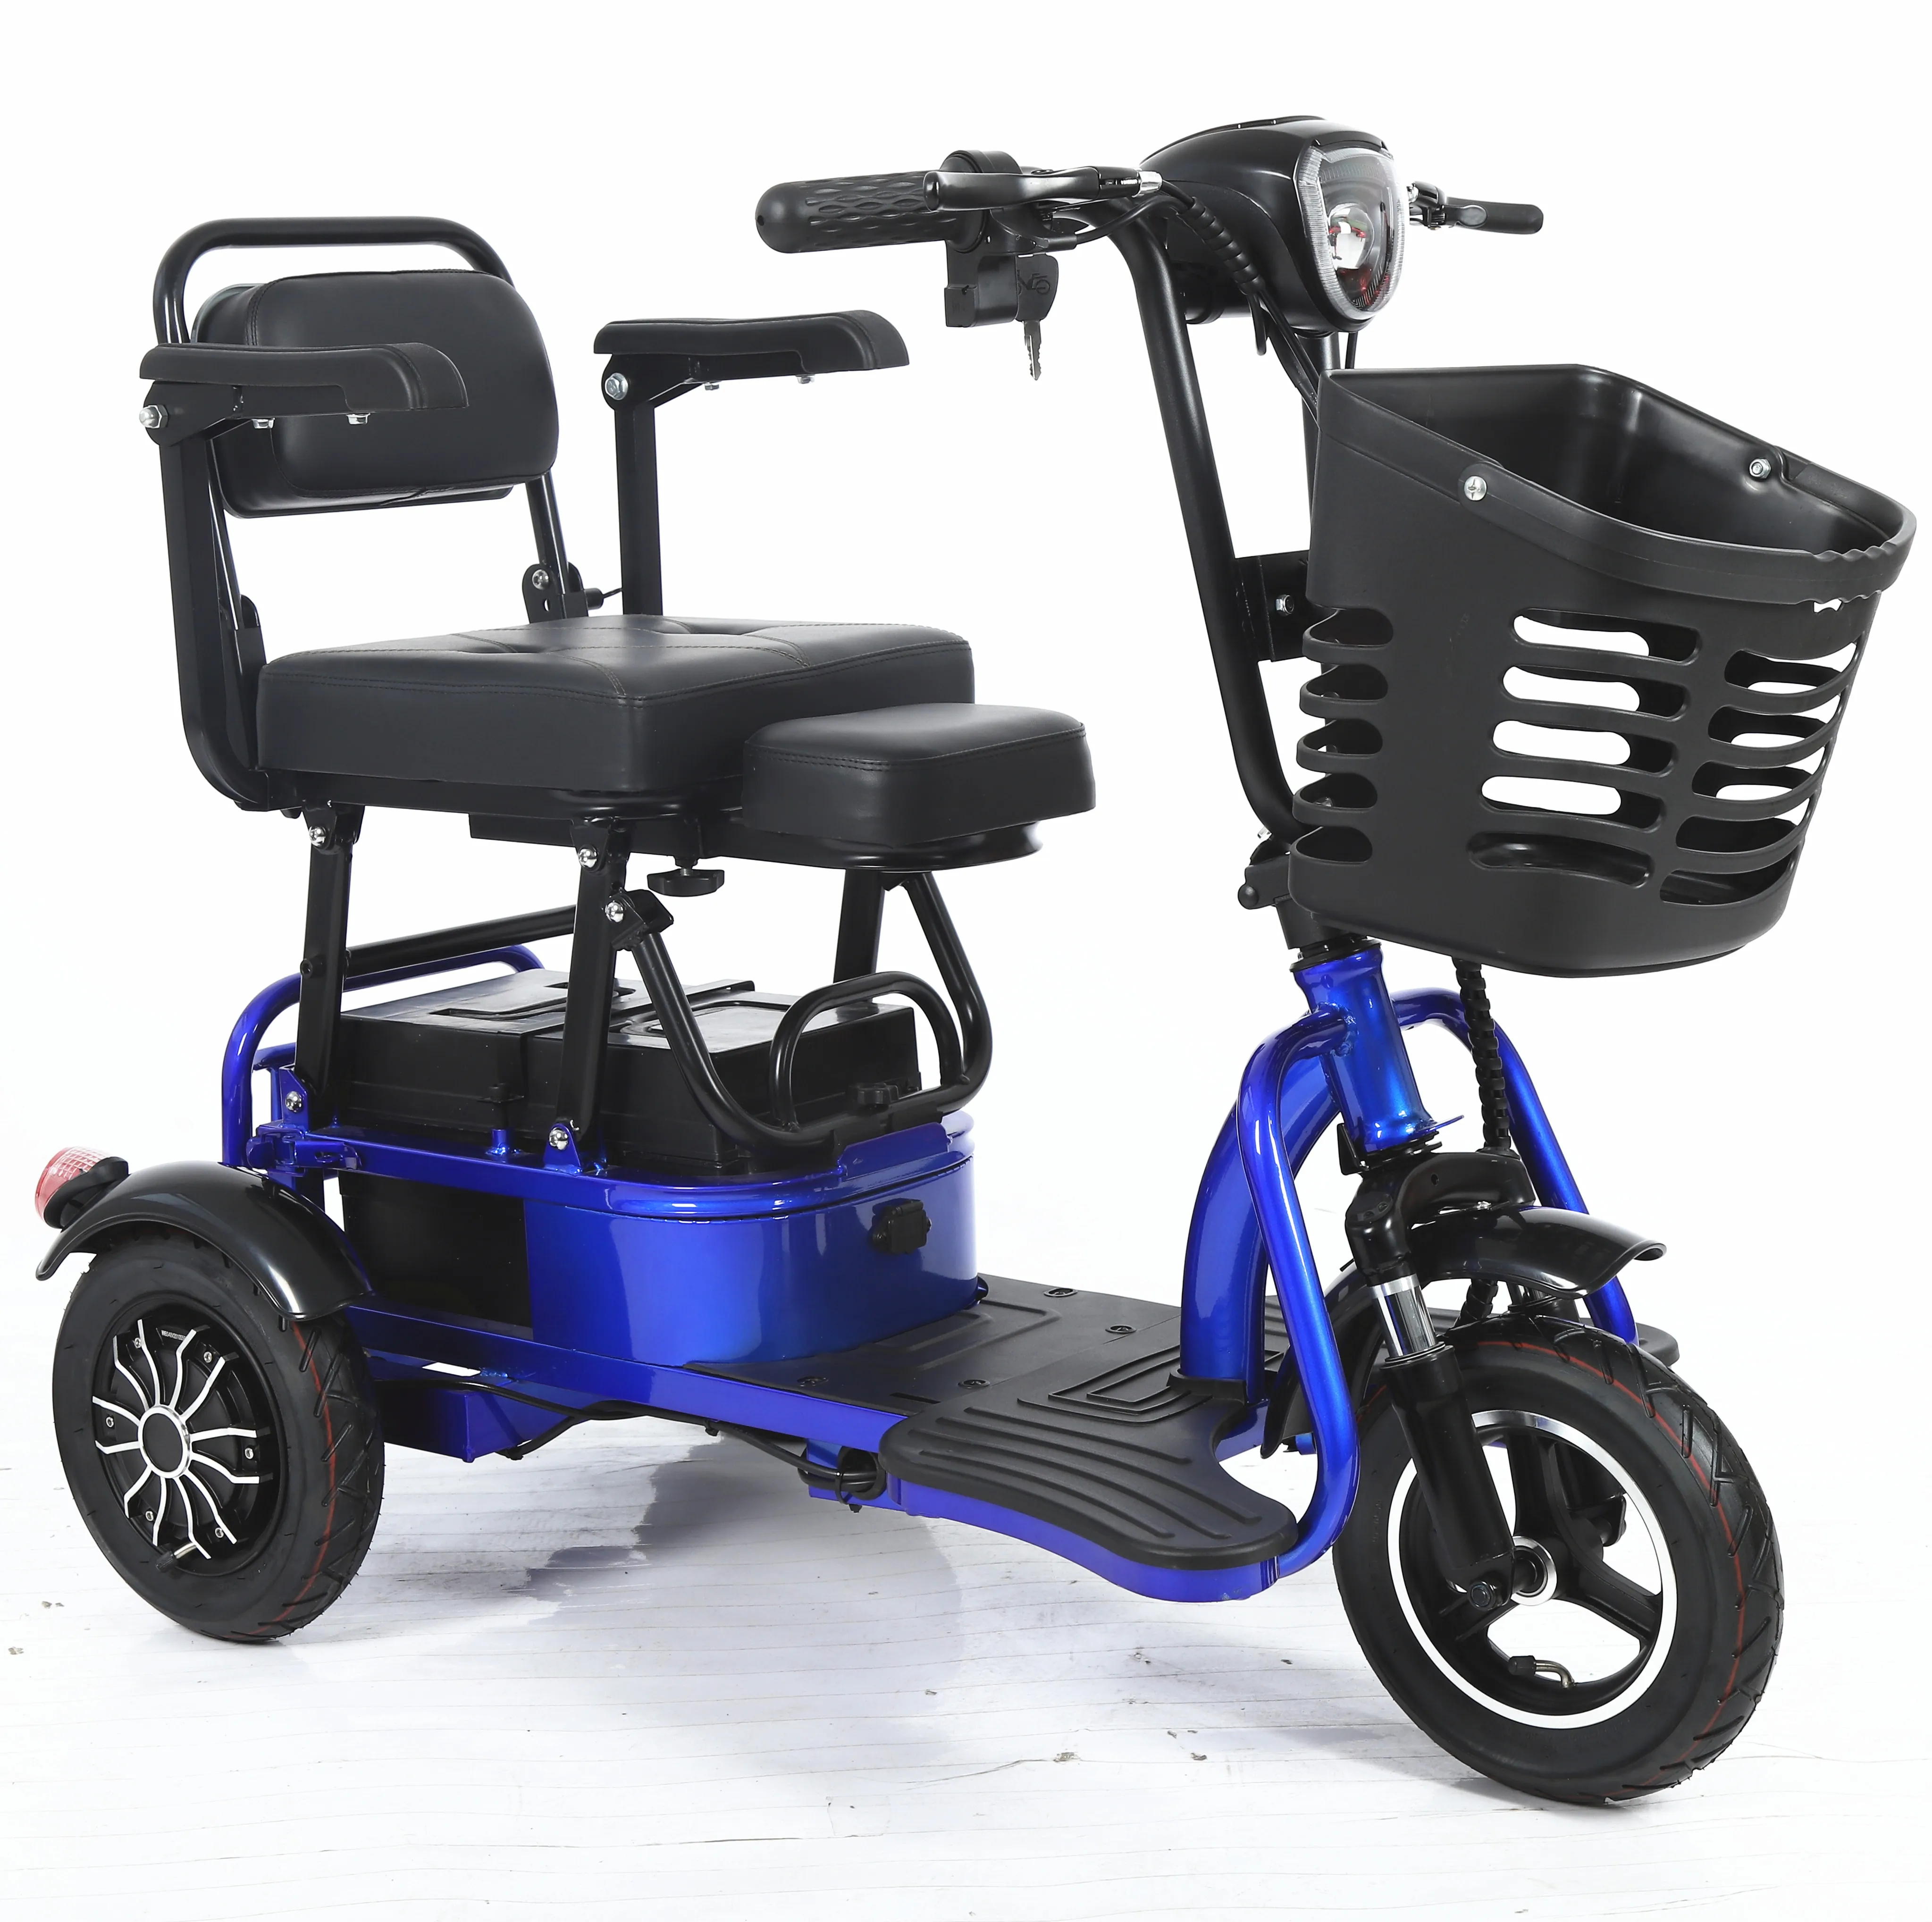 Hot sale three wheel electric tricycle scooter food delivery tailg 2021 cheap electric tricycle motorcycle food delivery cargo electric tricycle off road fat tire electric tricycle riding pedal assisted 3 wheel electric bike